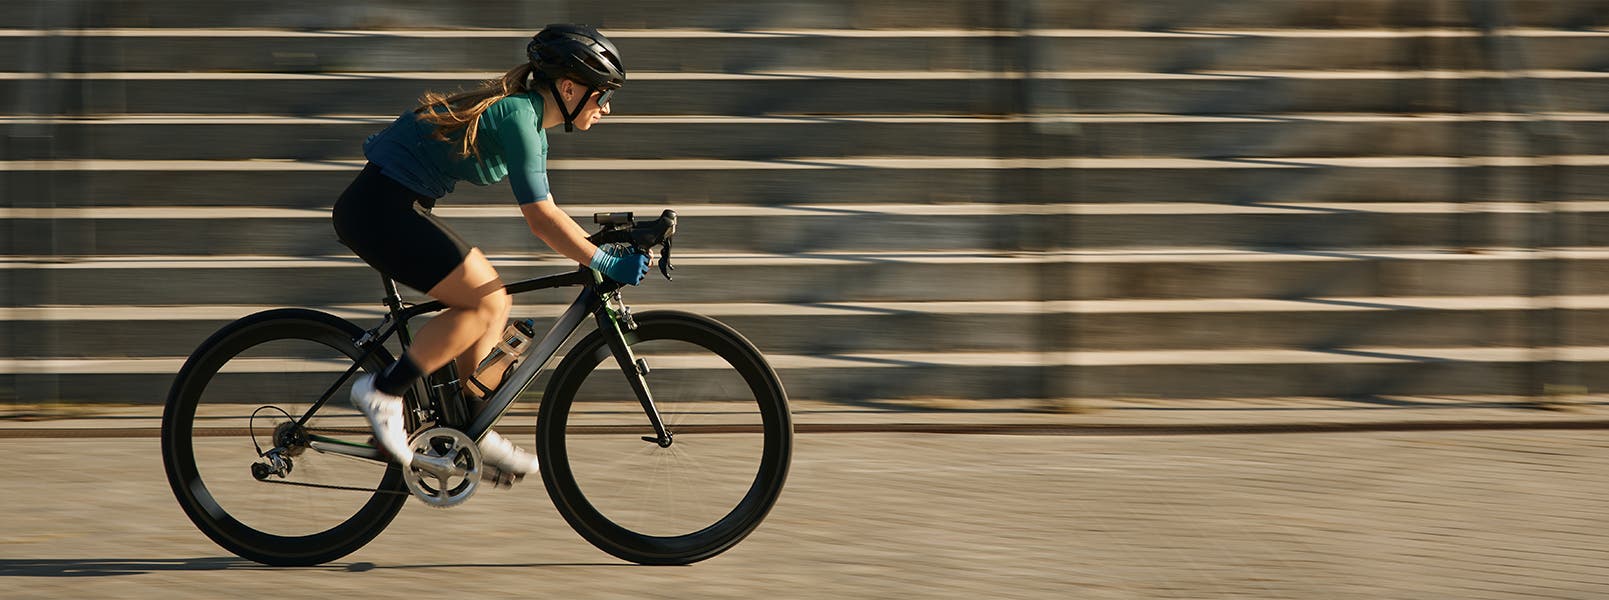 A woman cycling in sleek gear and a helmet.